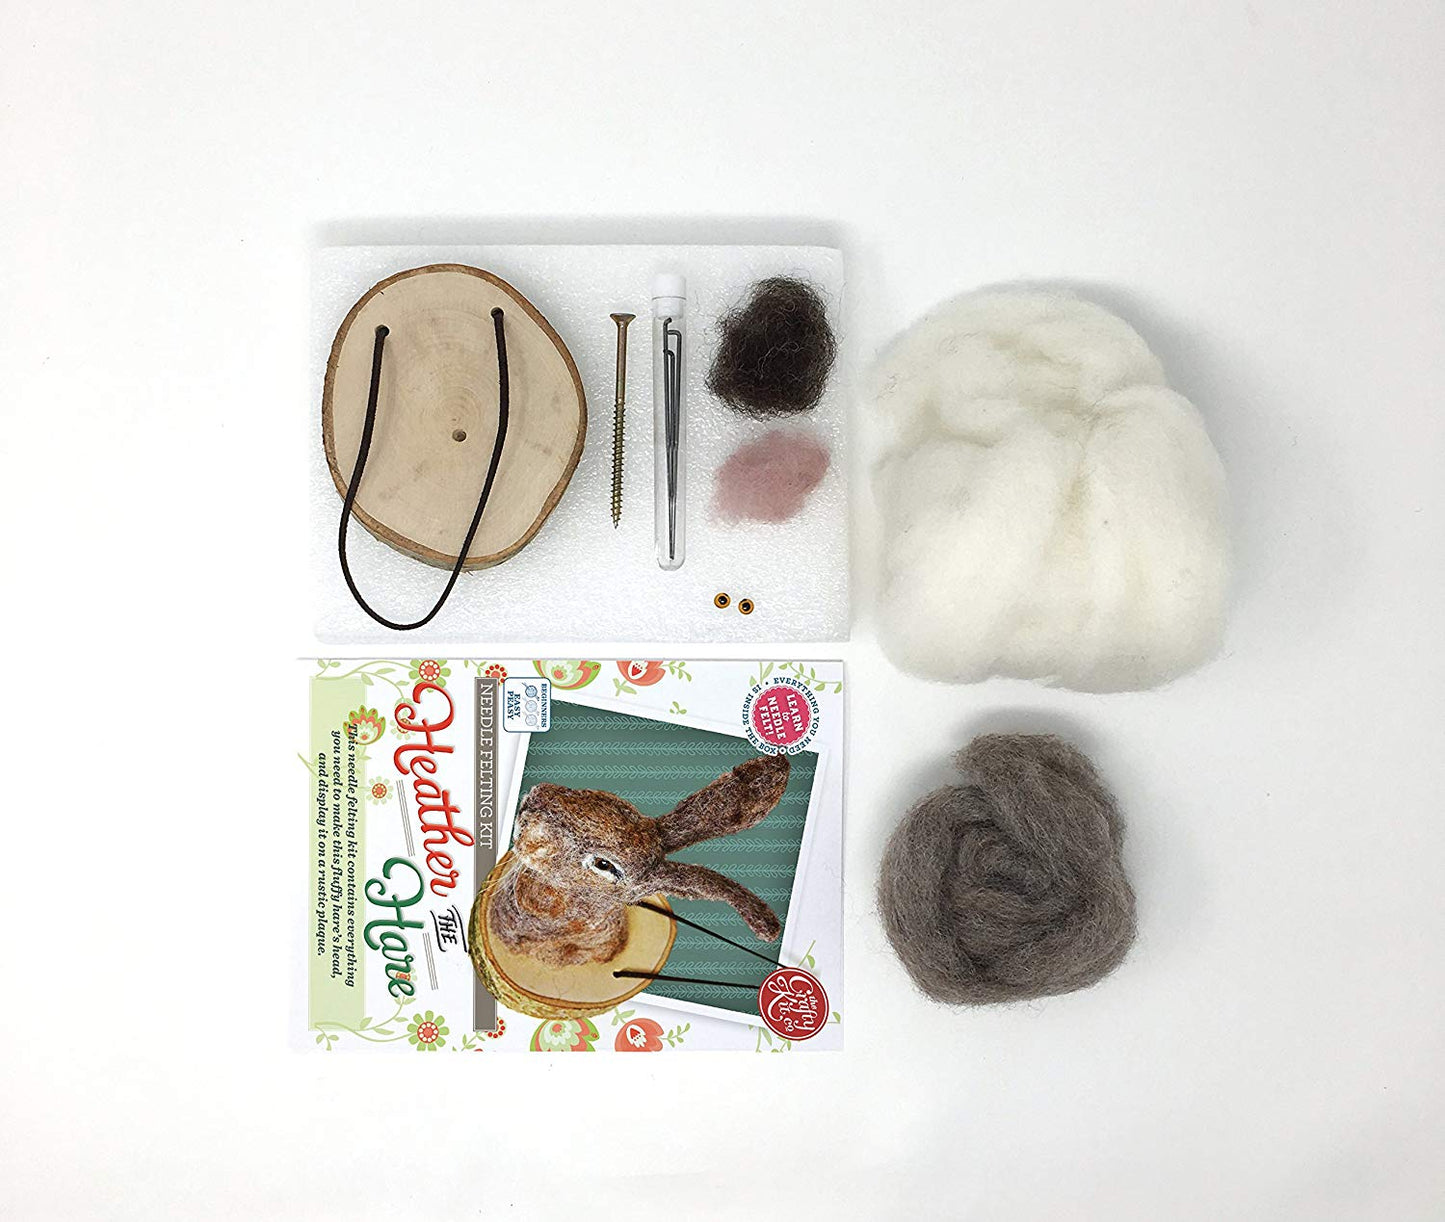 Crafty Kit Company Heather the Hare Beginners Needle Felting Kit, designed and made in the UK, complete with all materials and tools required, perfect gift or starter project for a craft lover. - hanrattycraftsgifts.co.uk